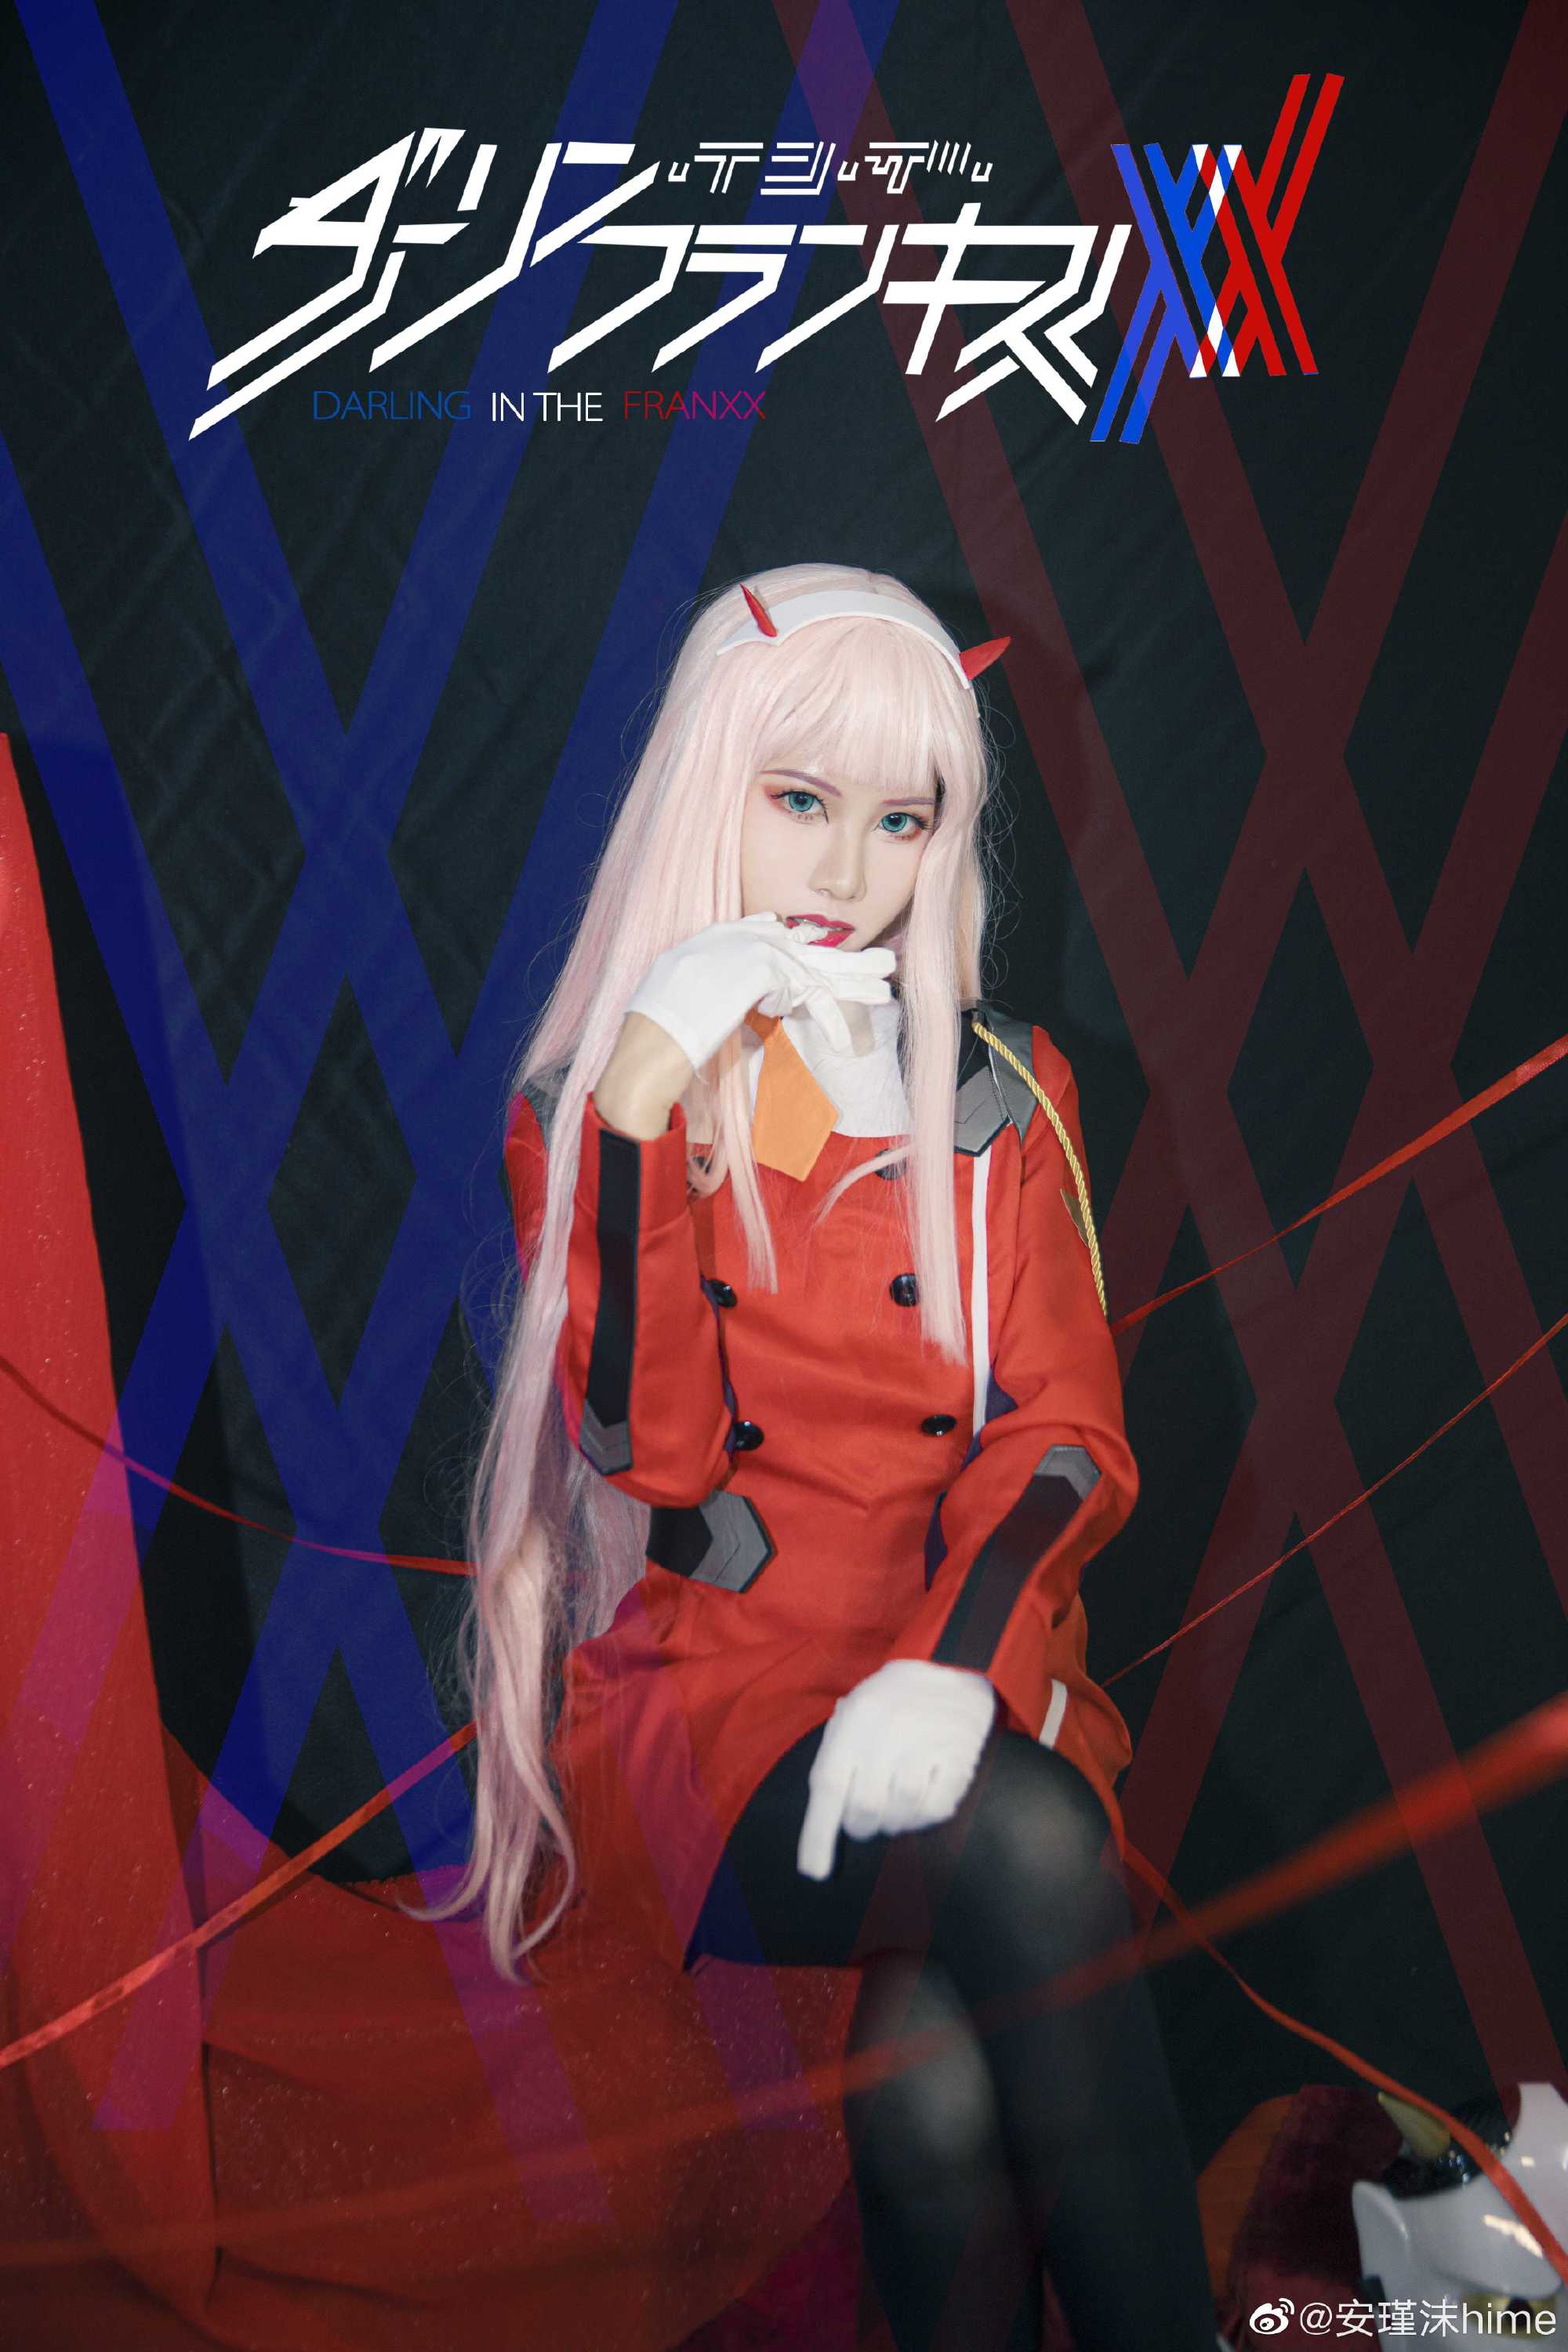 DARLING in the FRANXX   02   @安瑾沫hime - COSPLAY -